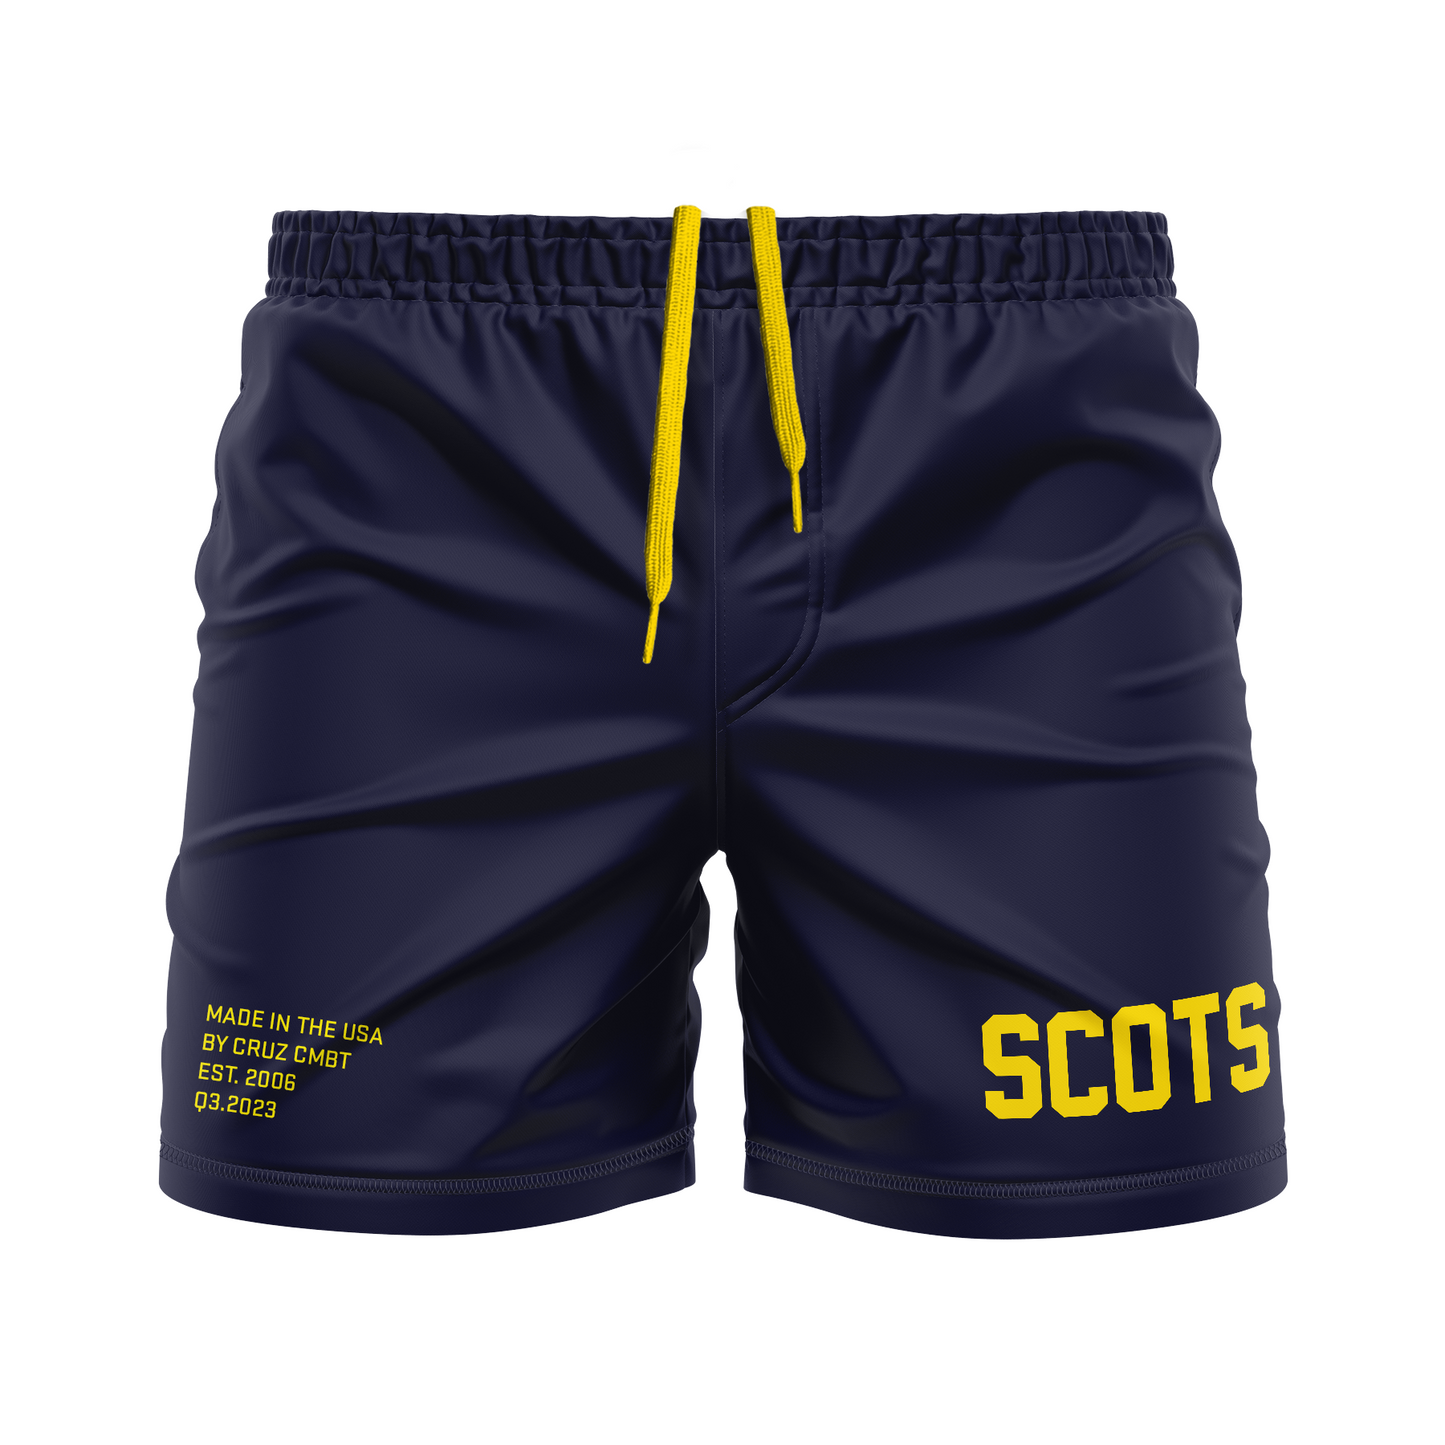 Scots Wrestling Club FC shorts Standard Issue, athl. gold on navy